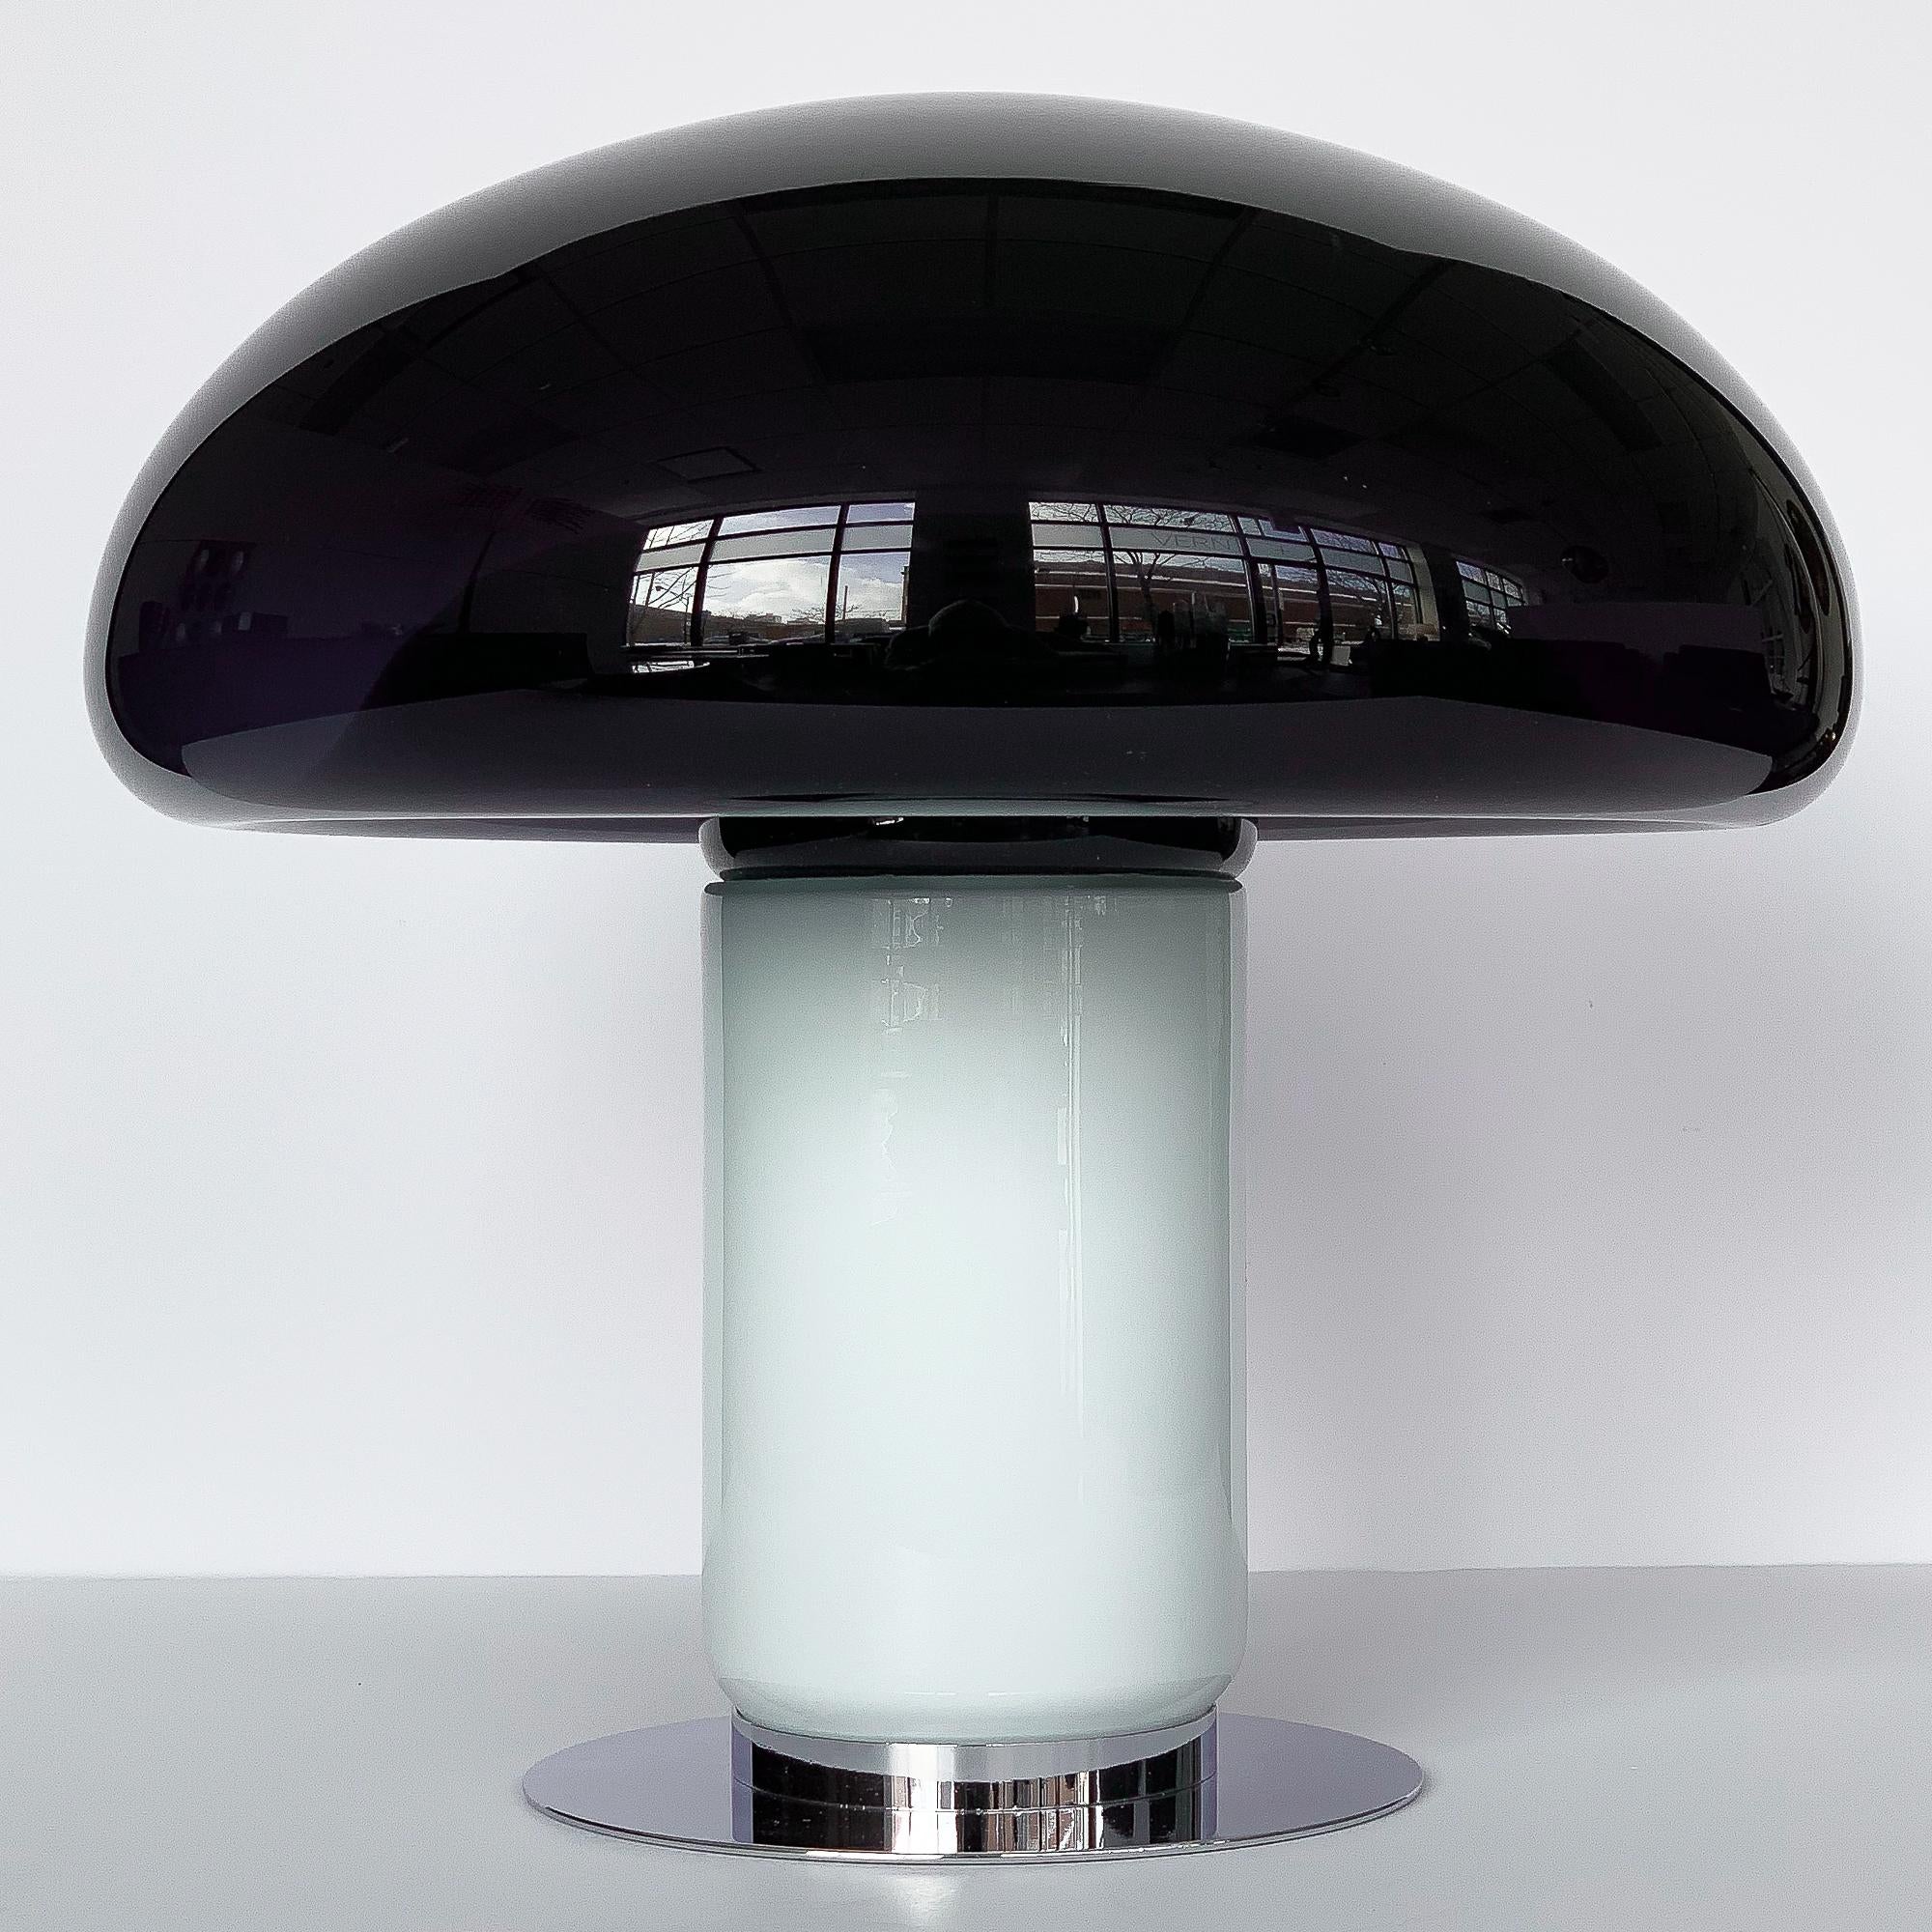 A Vistosi purple / amethyst mushroom shaped table lamp, circa 1960s Italy. Attributed to designer Michael Red. An almost black amethyst glass mushroom dome with fused white translucent stem. When the light is off the amethyst glass appears to be